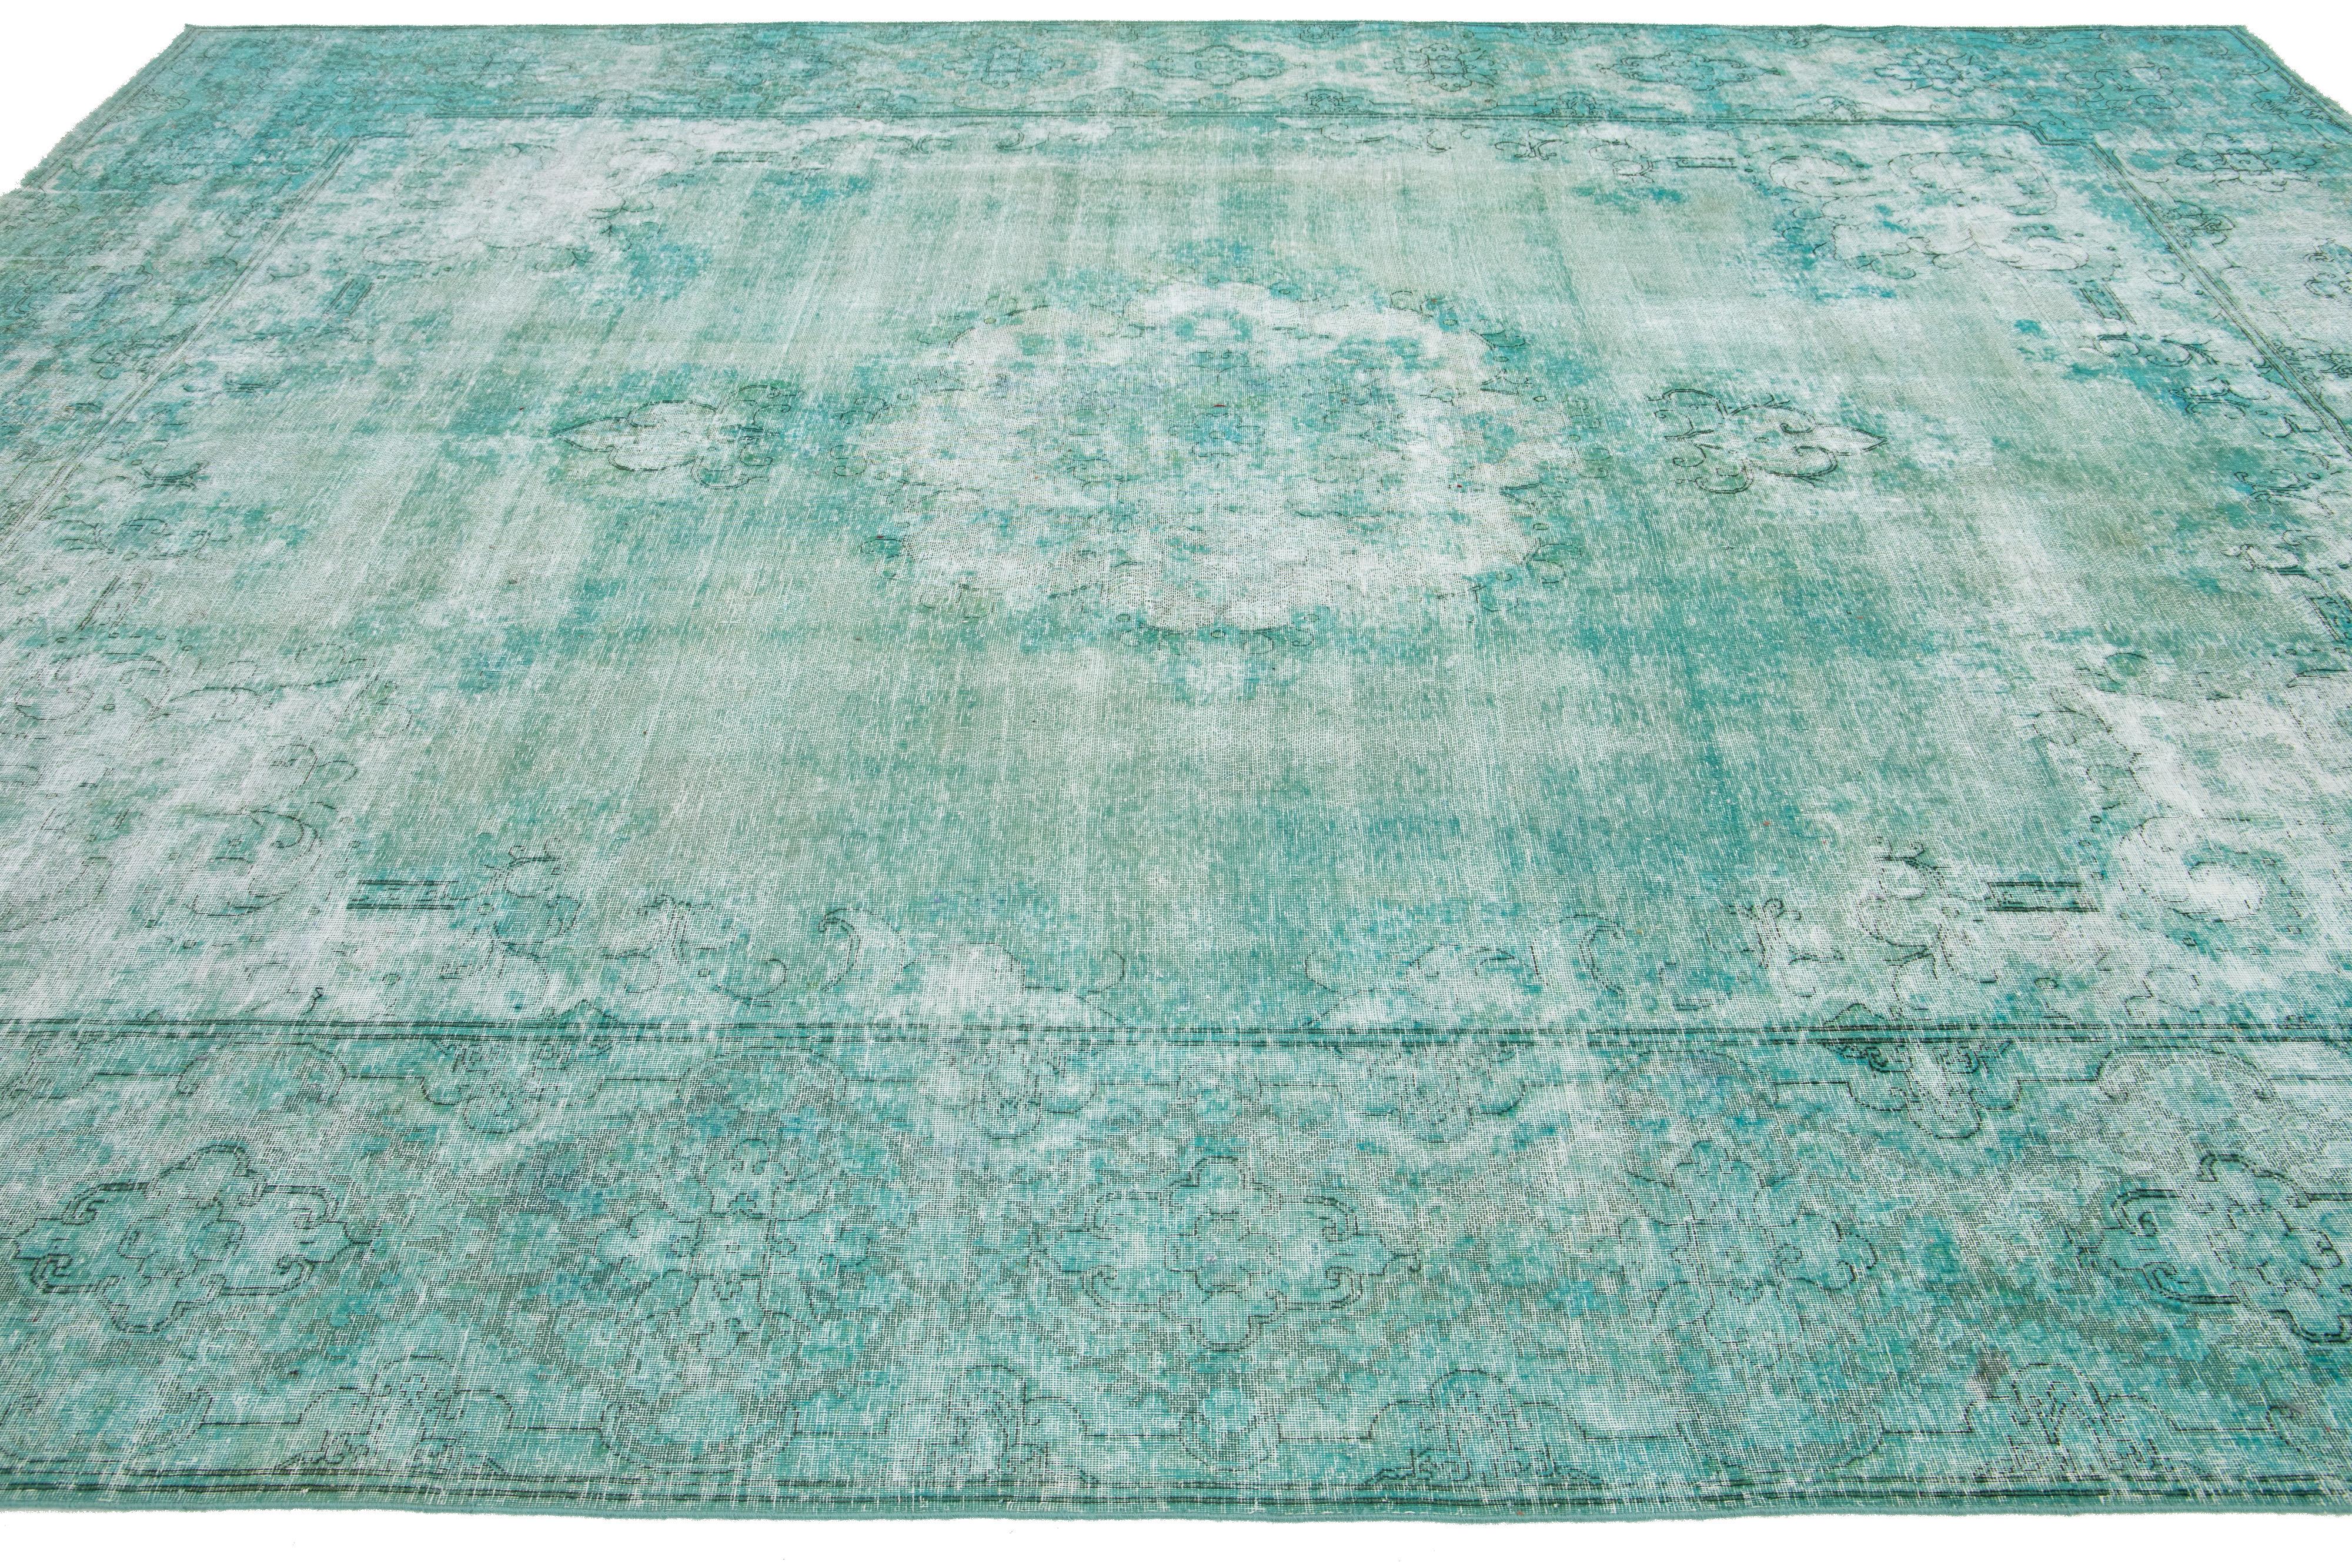   Antique Overdyed Wool Rug With Allover Motif In Light Green In Good Condition For Sale In Norwalk, CT